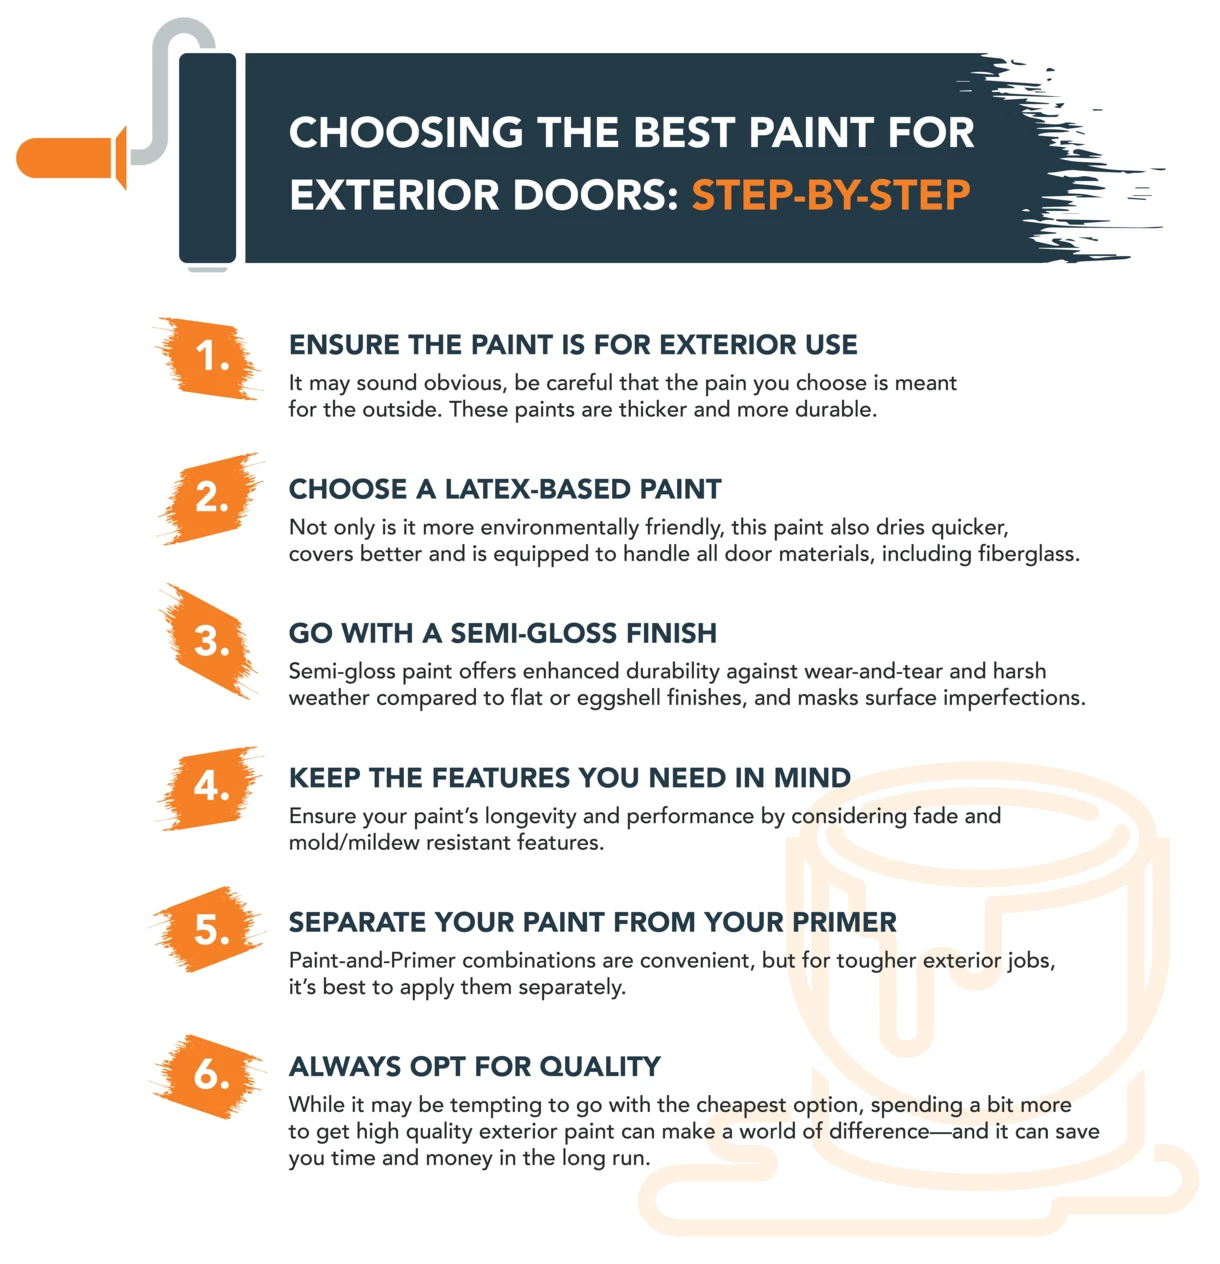 Choosing the Best Paint for Exterior Doors: Step-by-Step